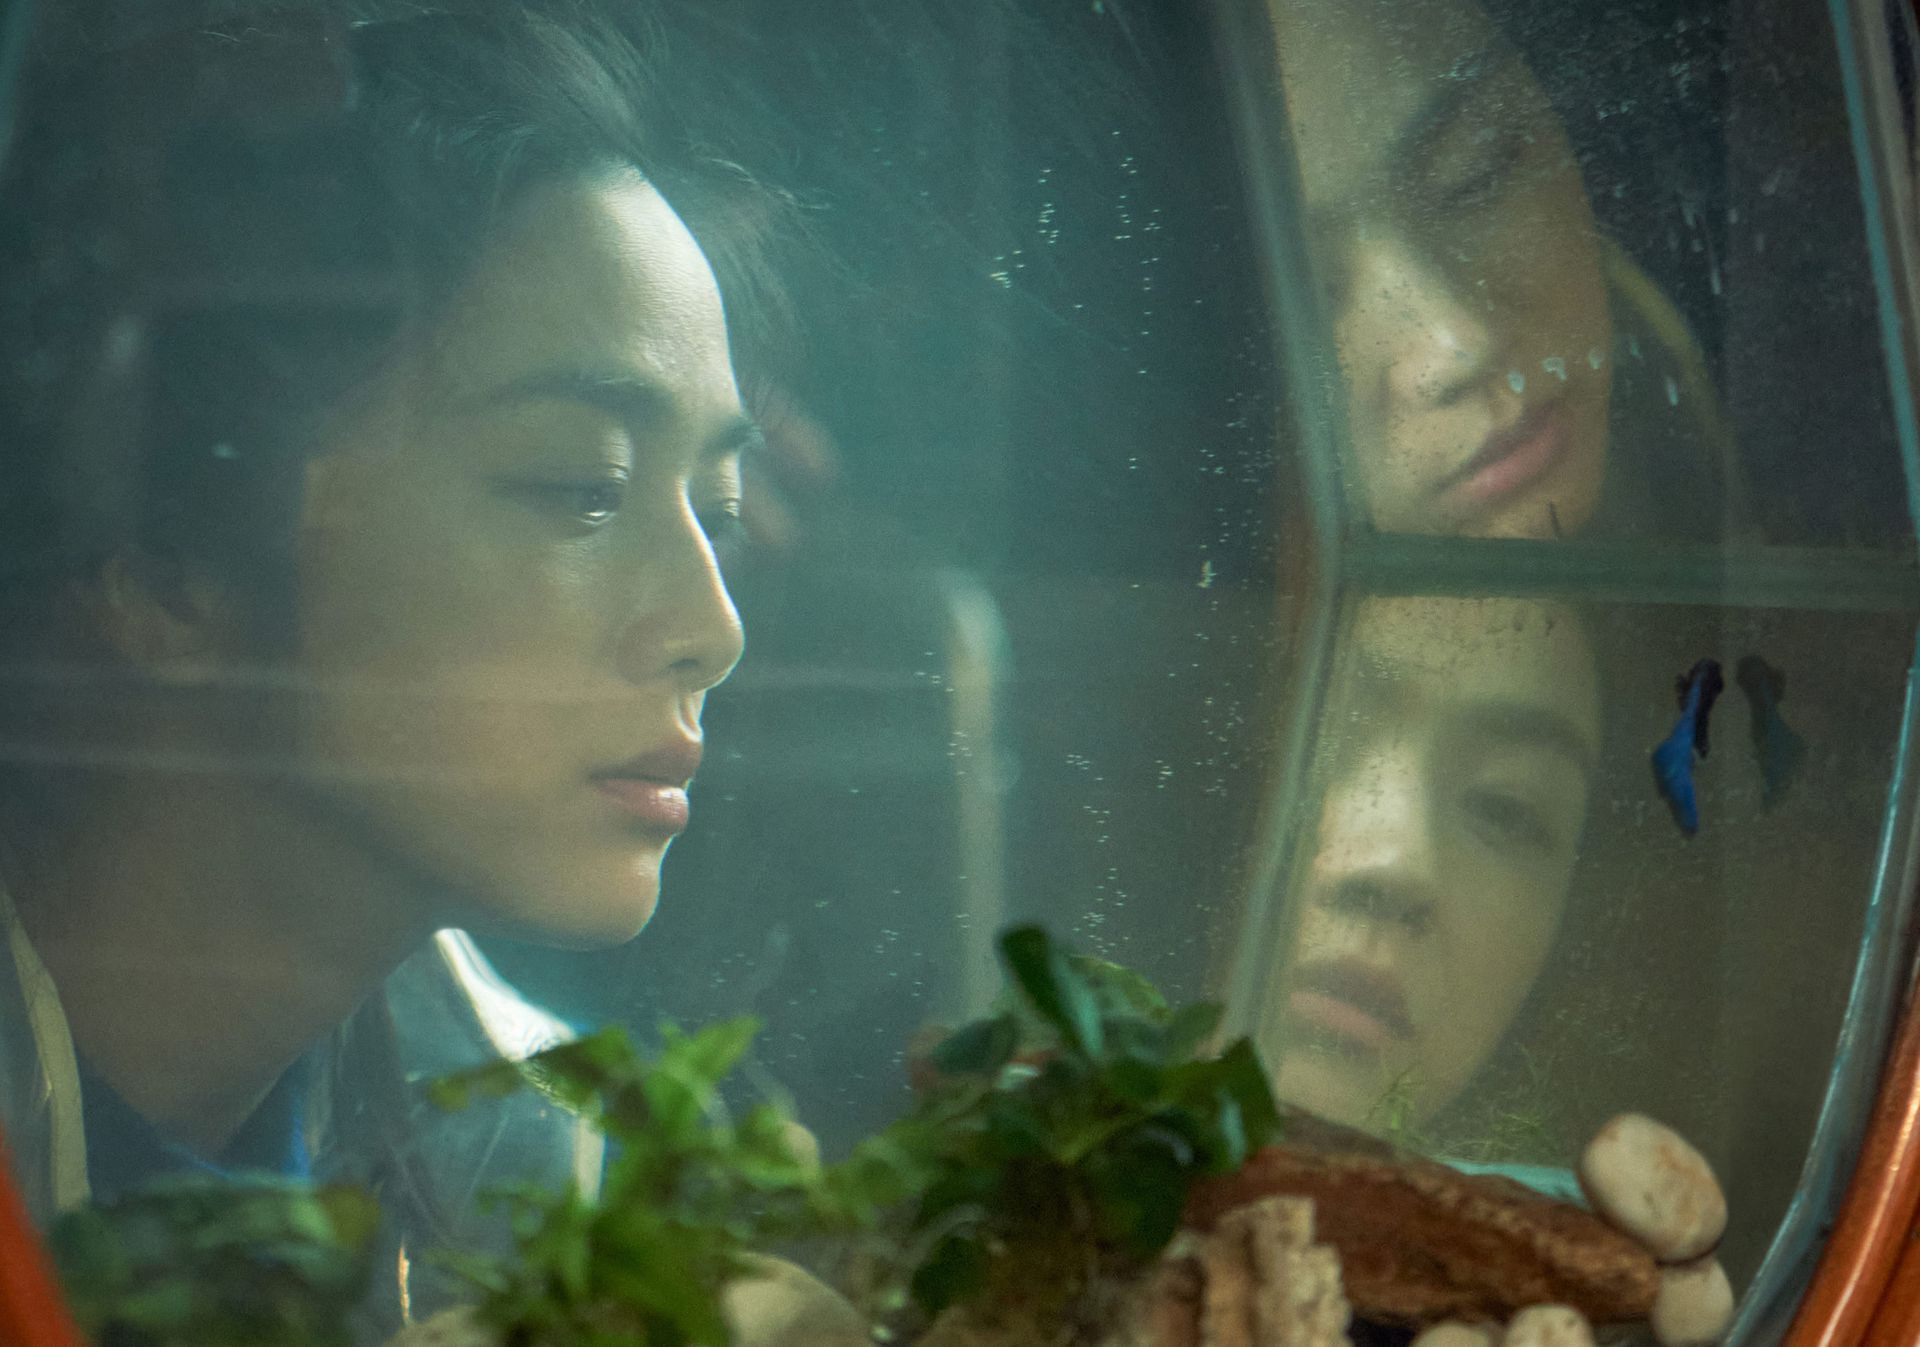 Seo-rae (Tang Wei) looks through a large glass fishbowl with faceted sides that reflect her face in Decision To Leave